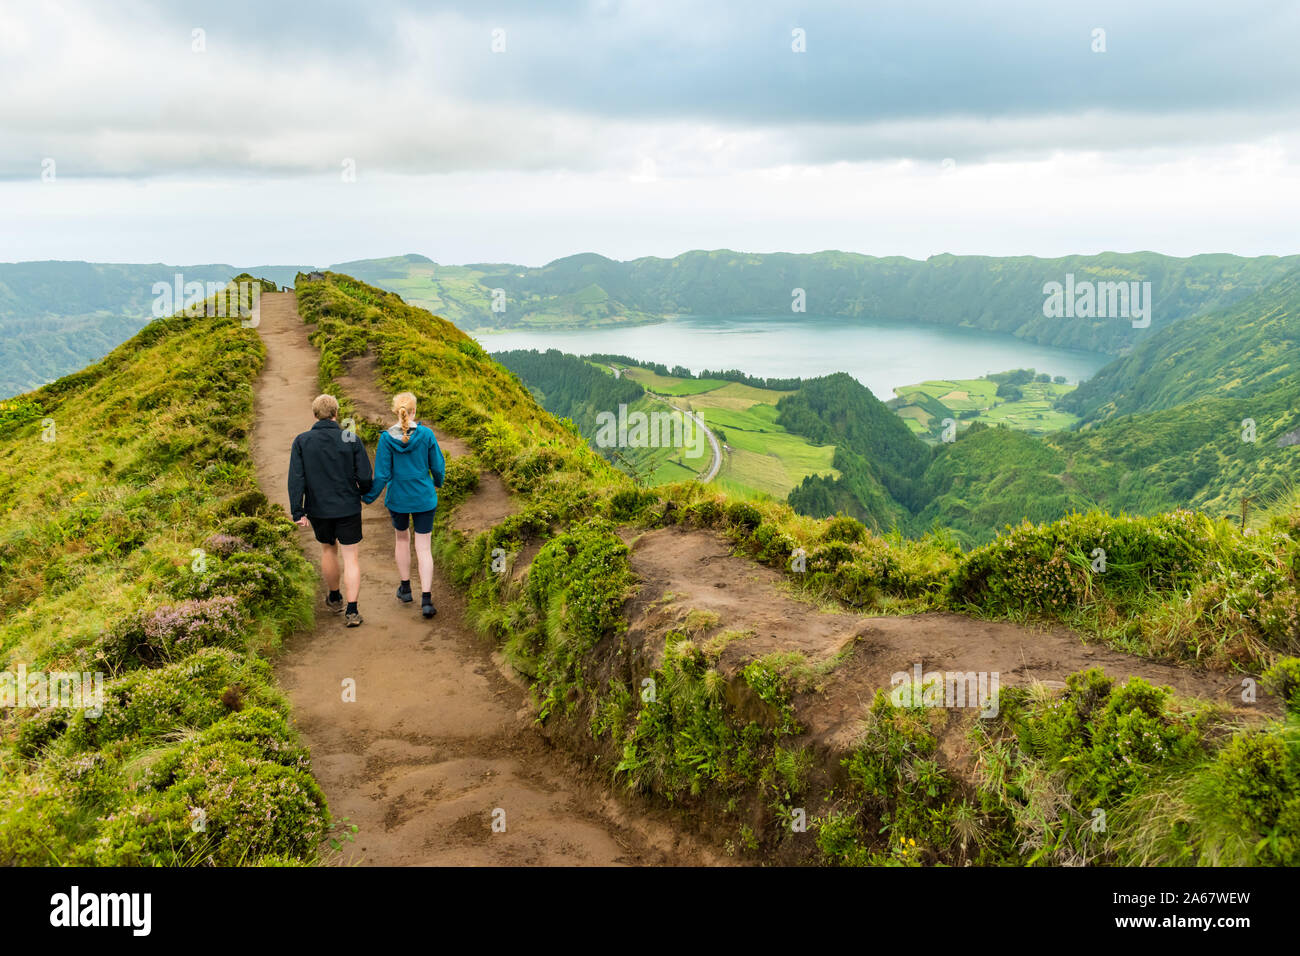 A young couple holding hands while walking towards the Grota do Inferno viewpoint at Sete Cidades on Sao Miguel Island, Azores. Stock Photo